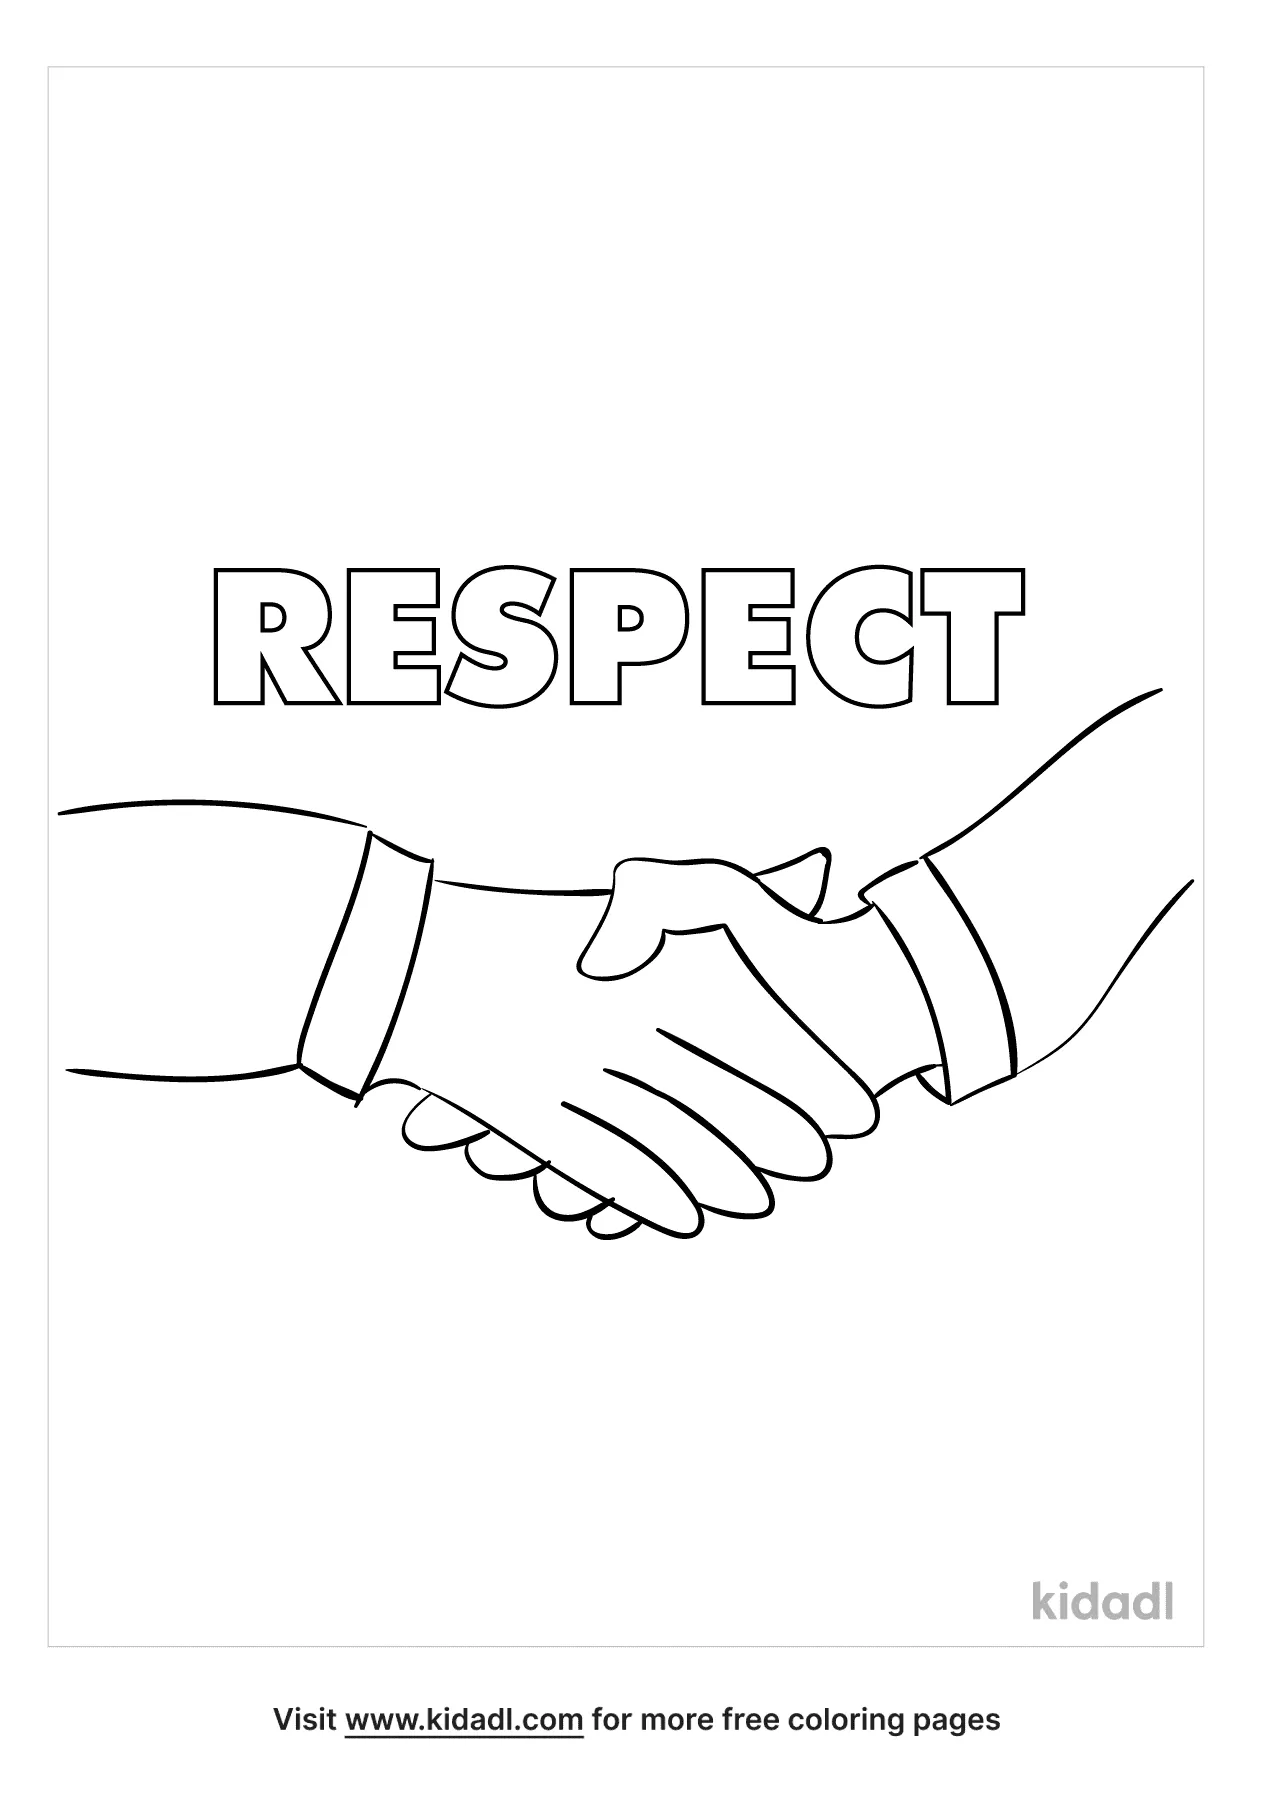 Free respect coloring page coloring page printables